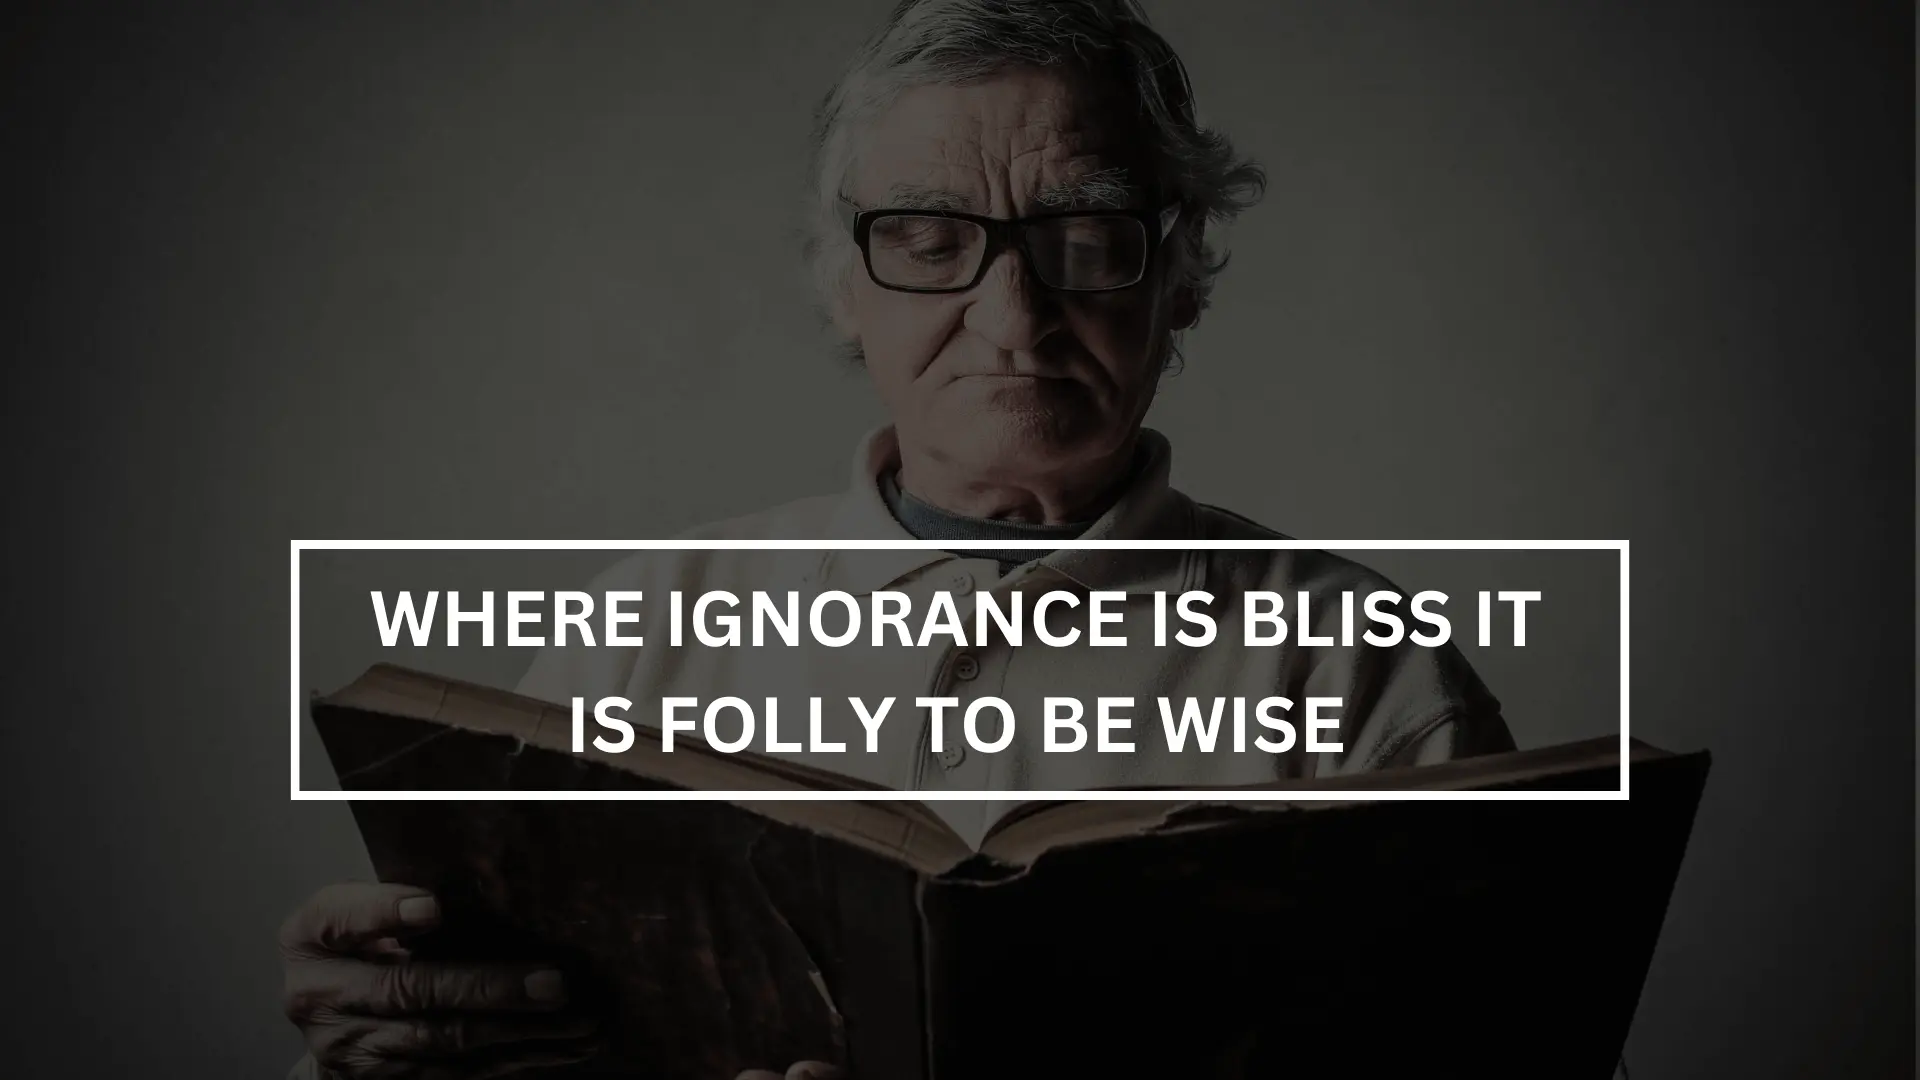 where ignorance is bliss it is folly to be wise